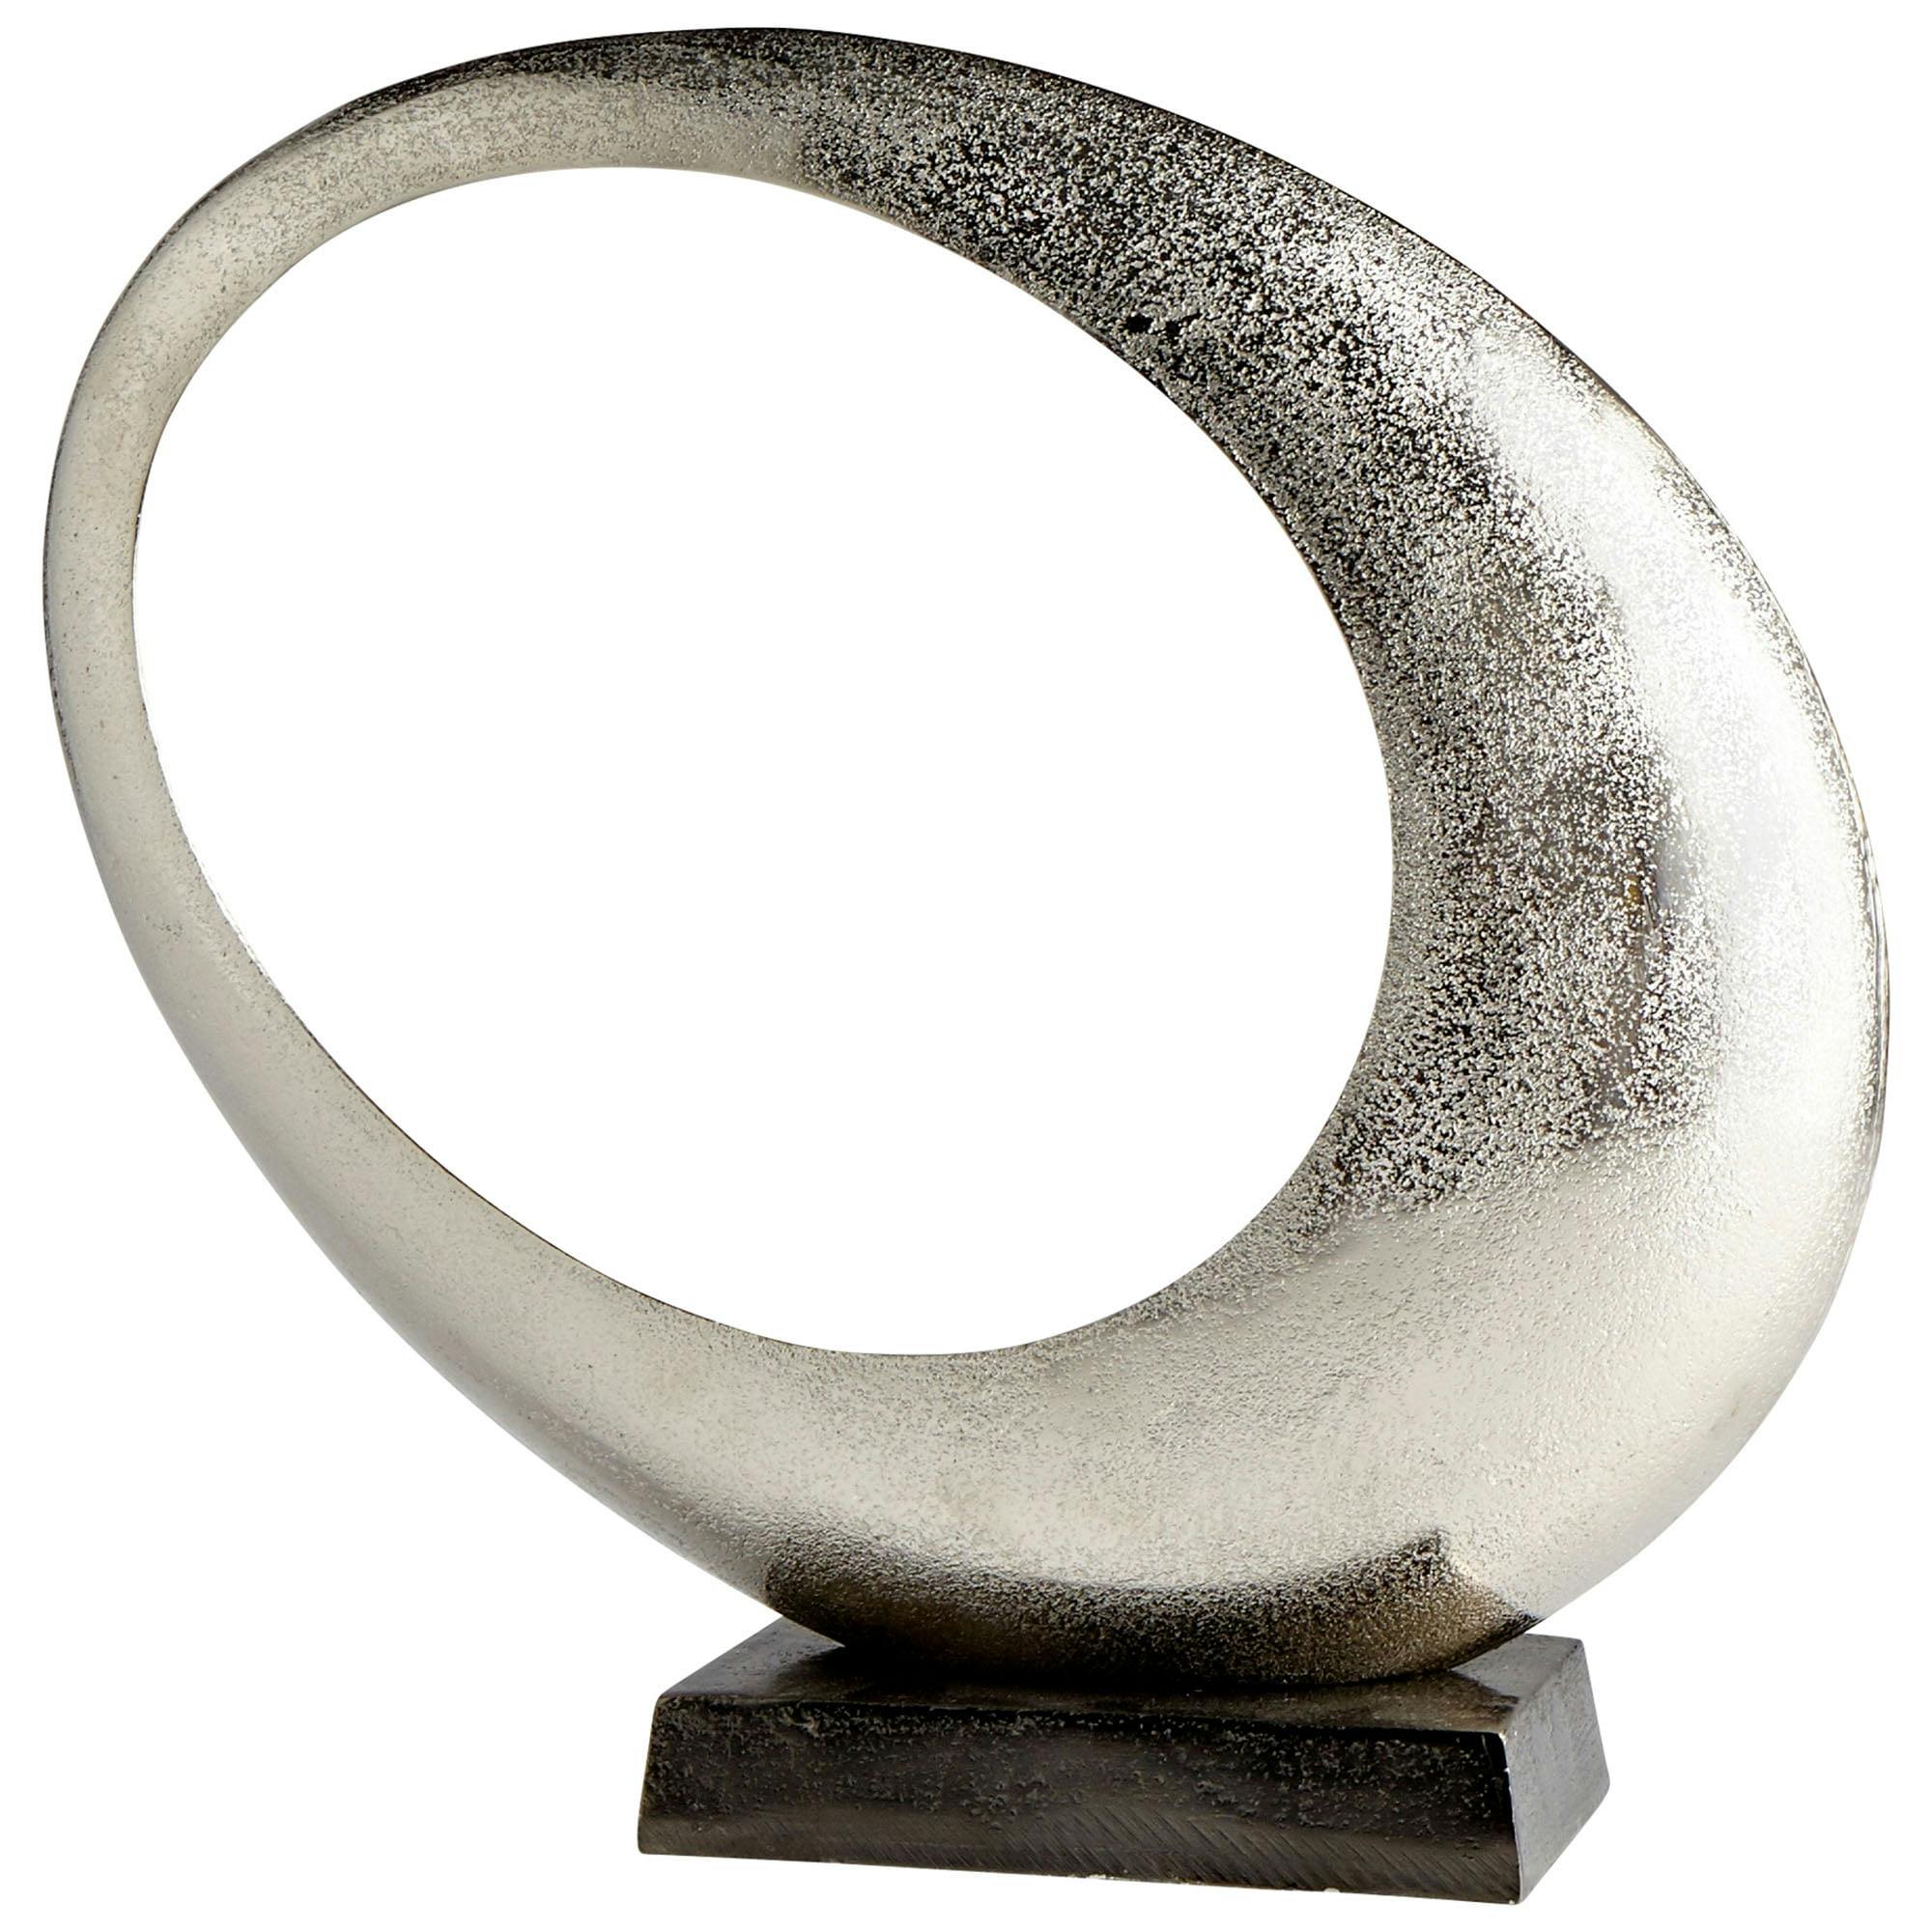 Lodge-Inspired Asymmetrical Silver Sculpture, 14.75"